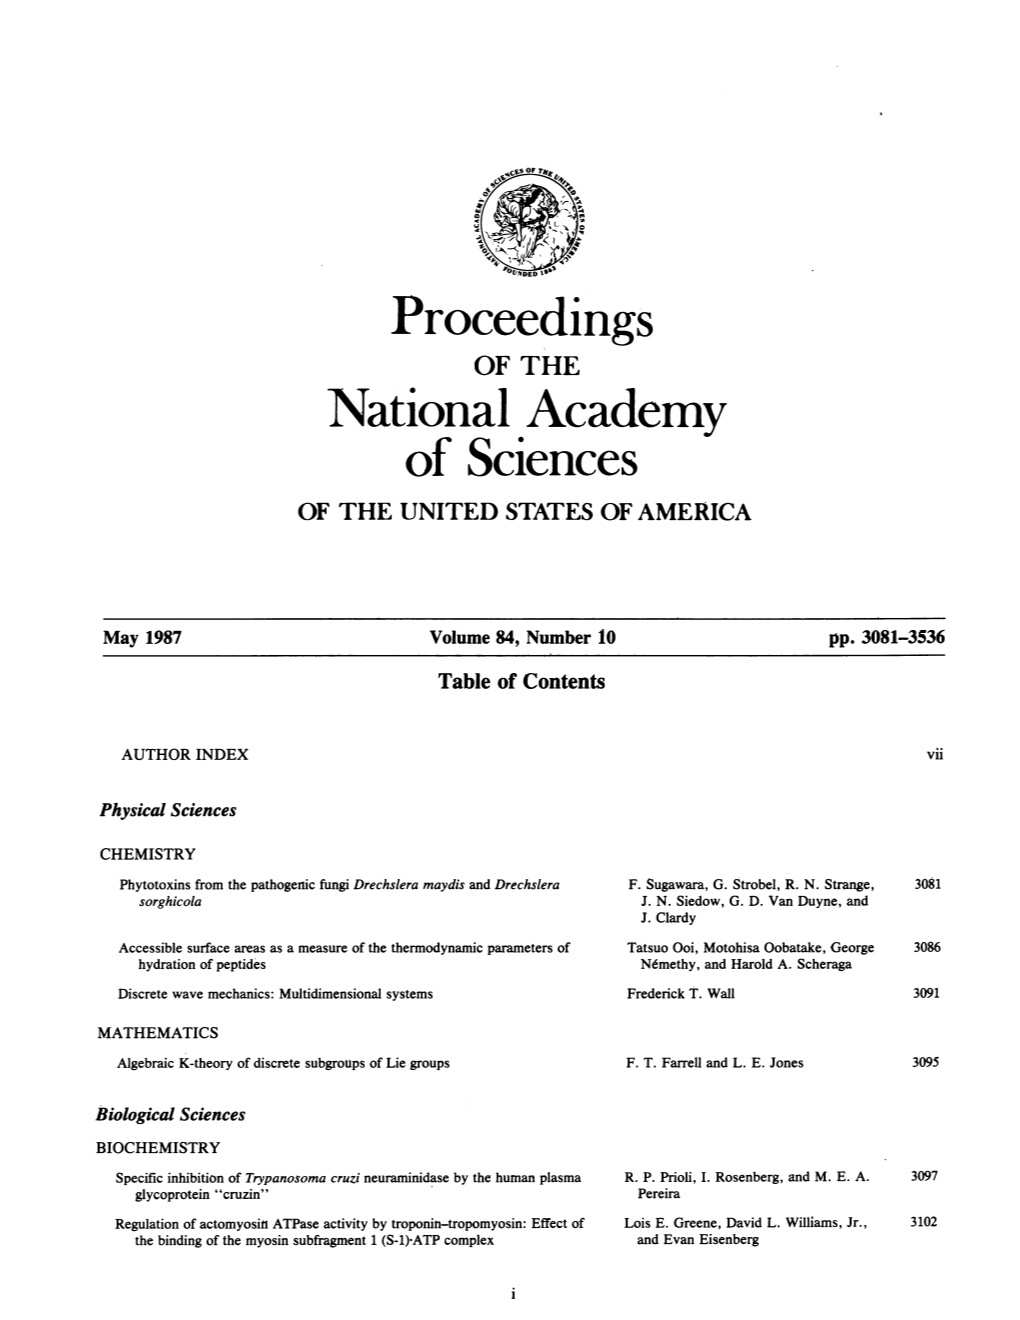 Of Sciences of the UNITED STATES of AMERICA